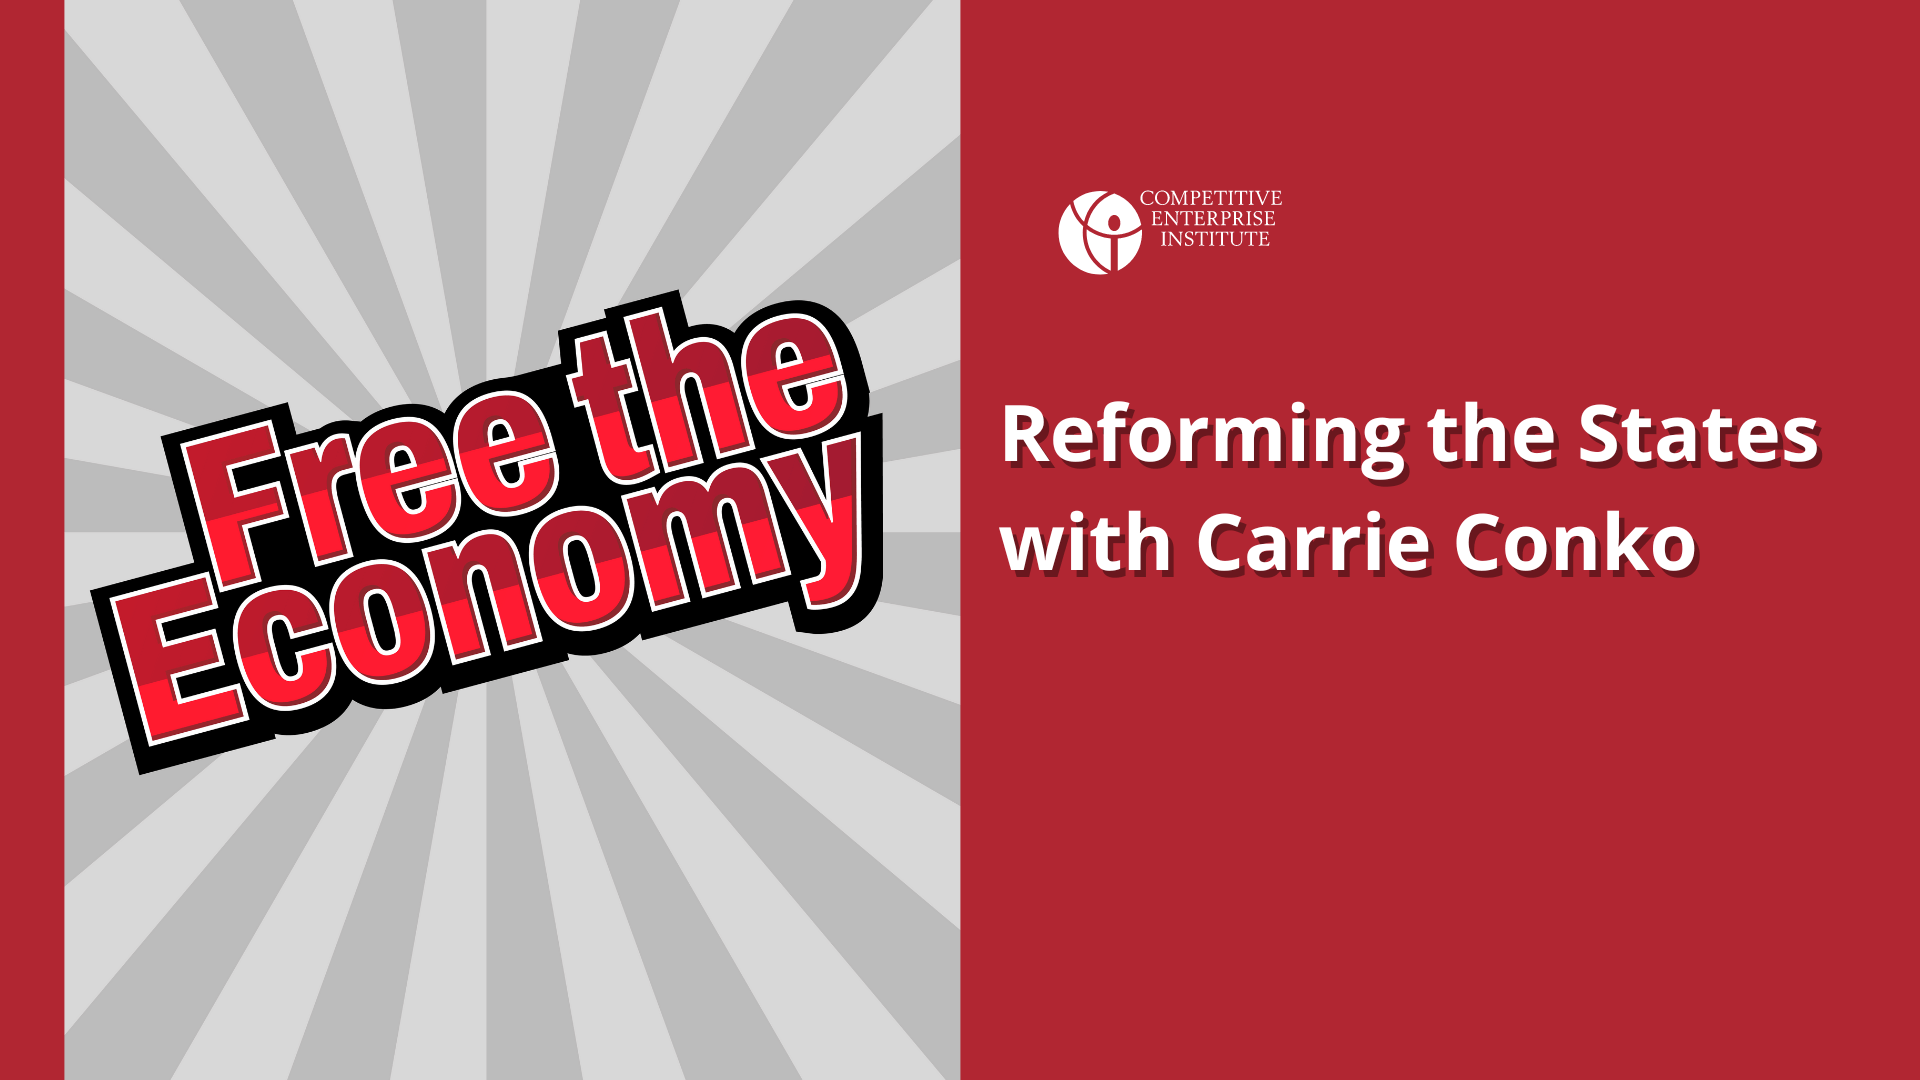 Reforming the States with Carrie Conko